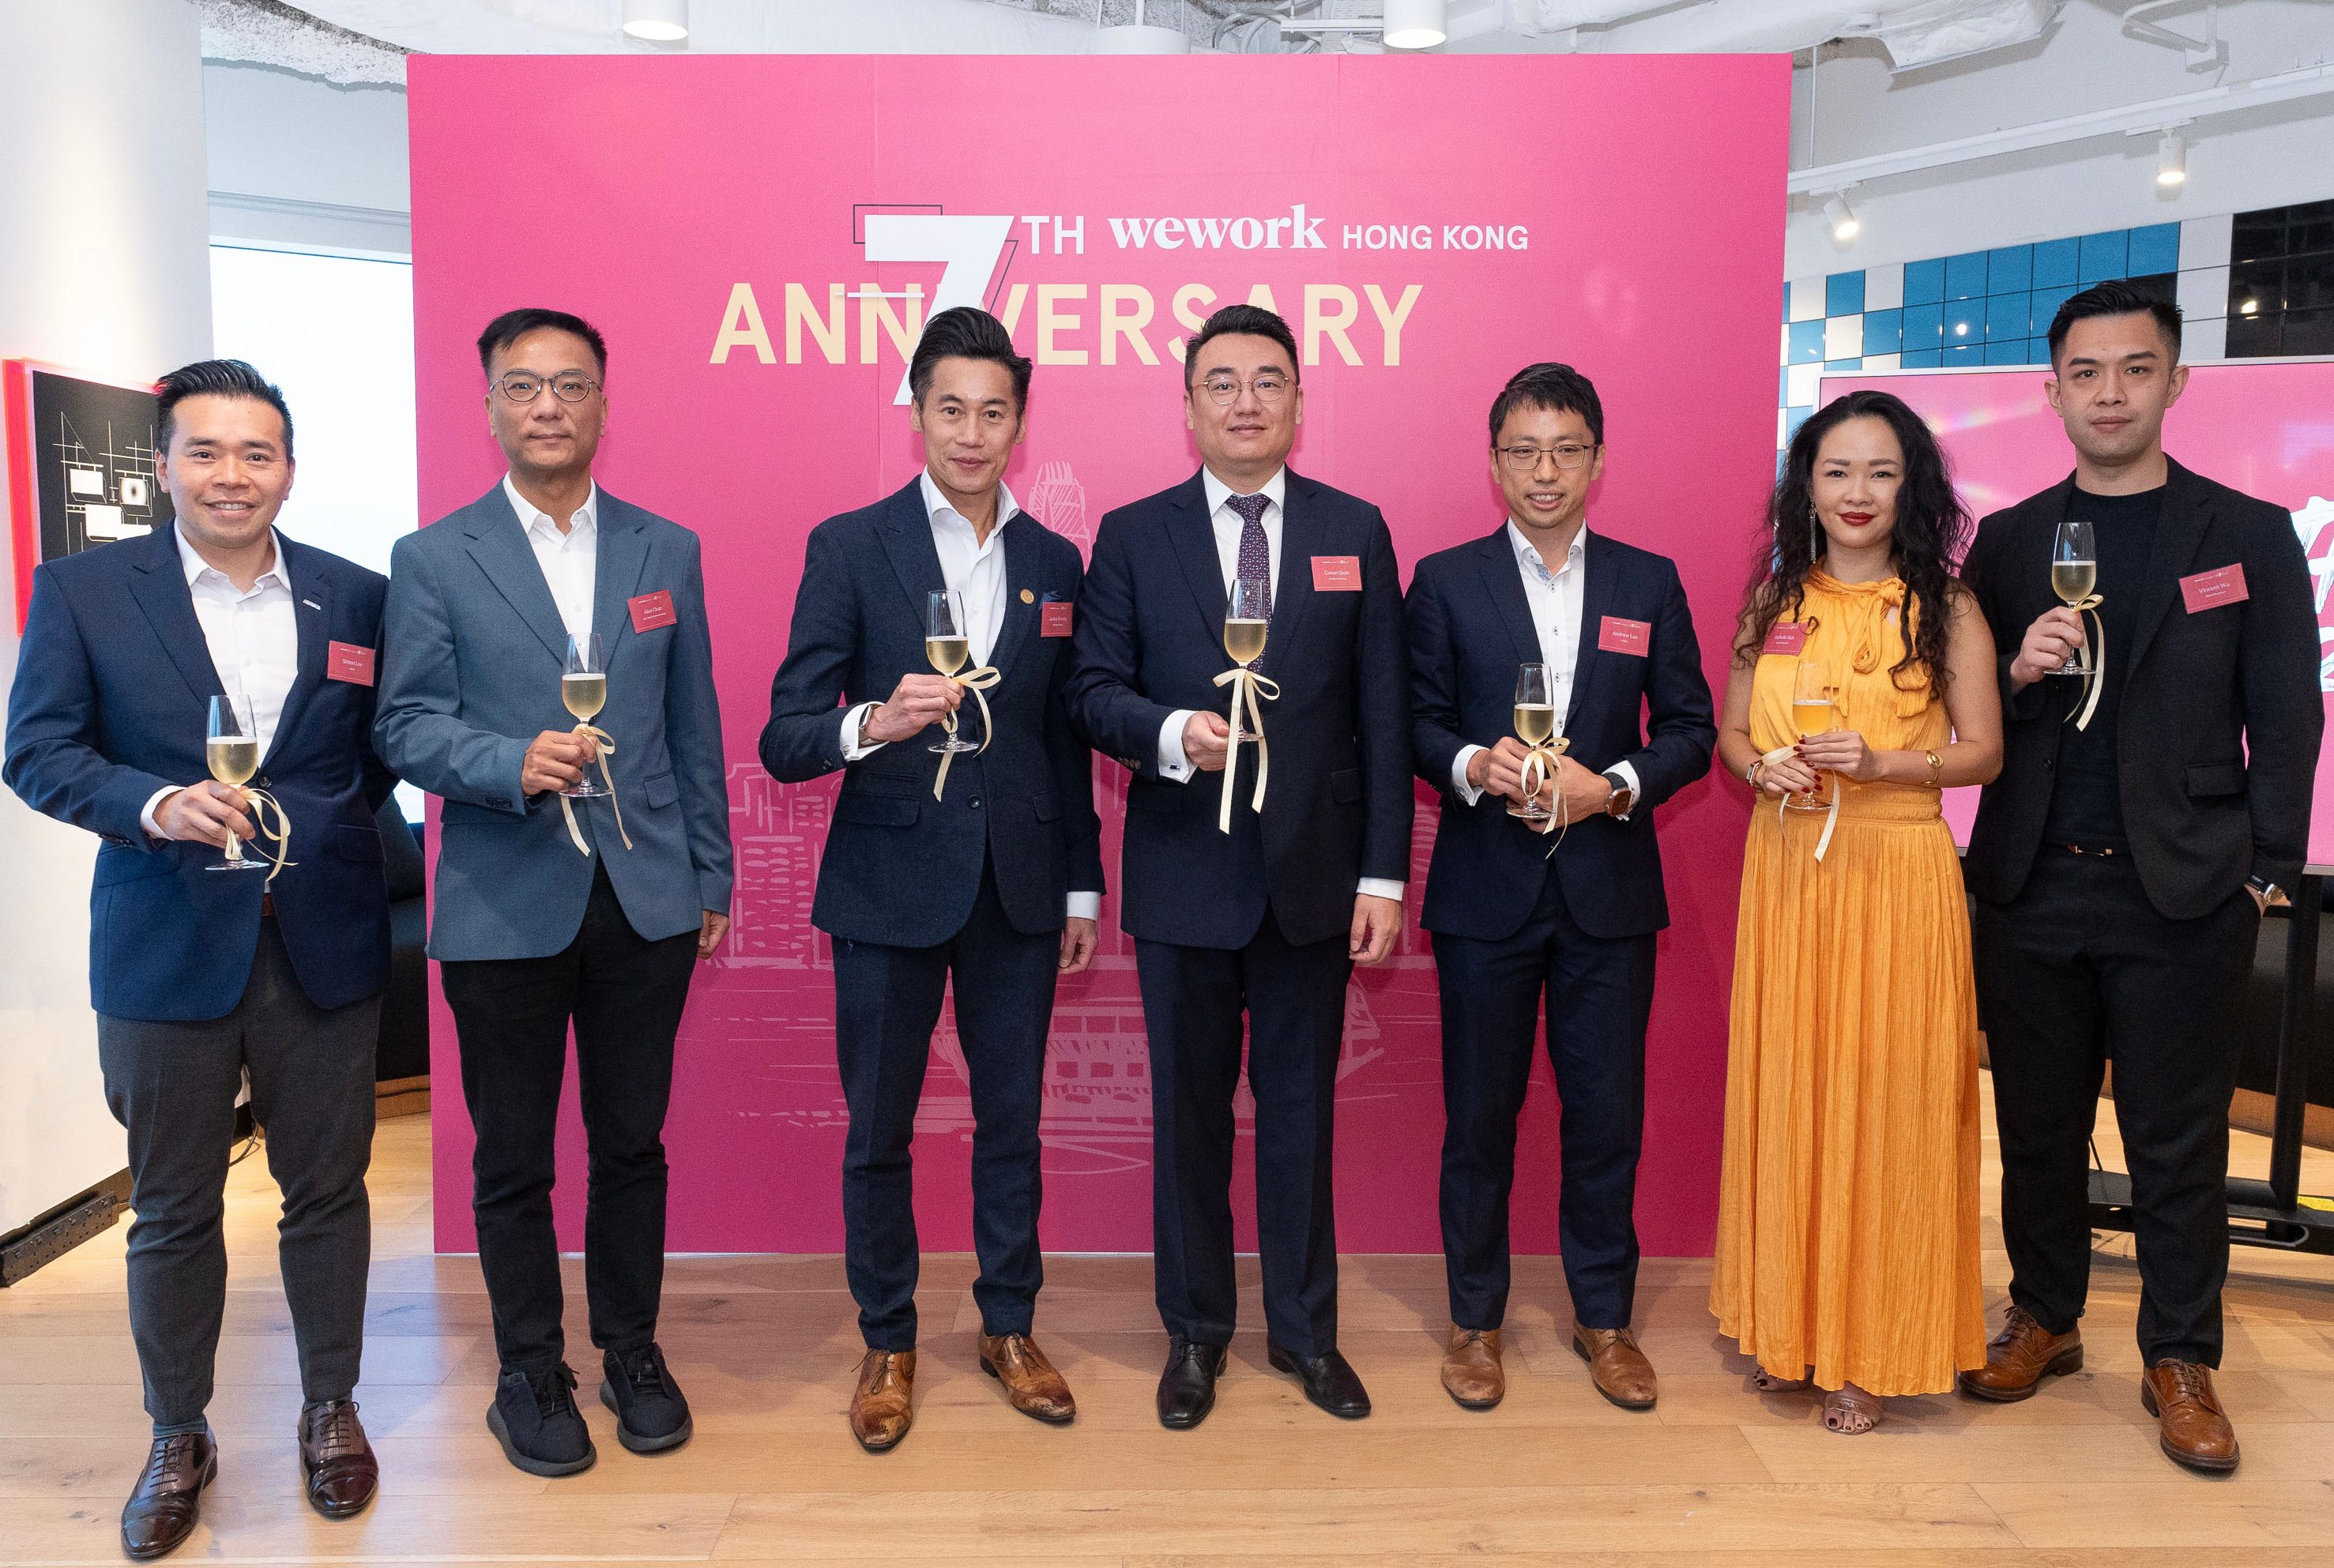 WeWork Hong Kong celebrates 7th anniversary with members and partners